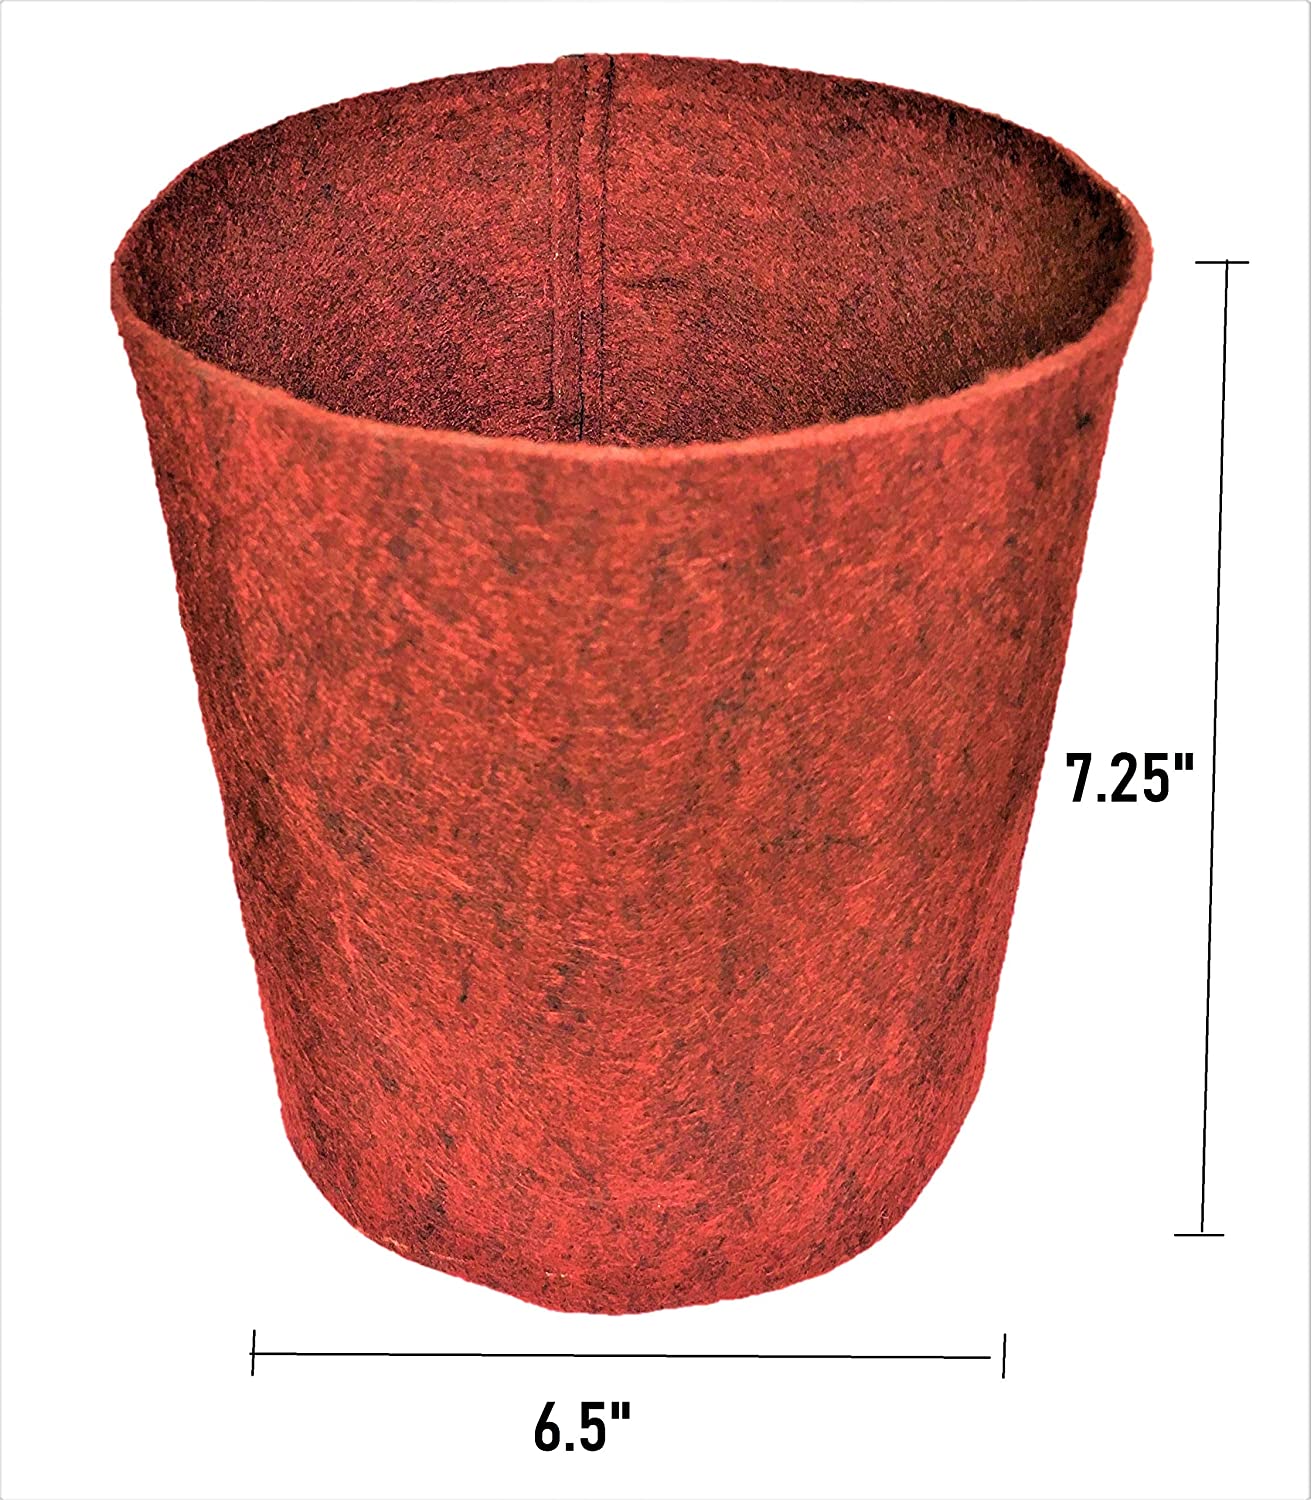 Oxypot Air Pruning Geo Fabric Grow Bags(1 Gallon), 6.5 X 7.25 Inches, Red